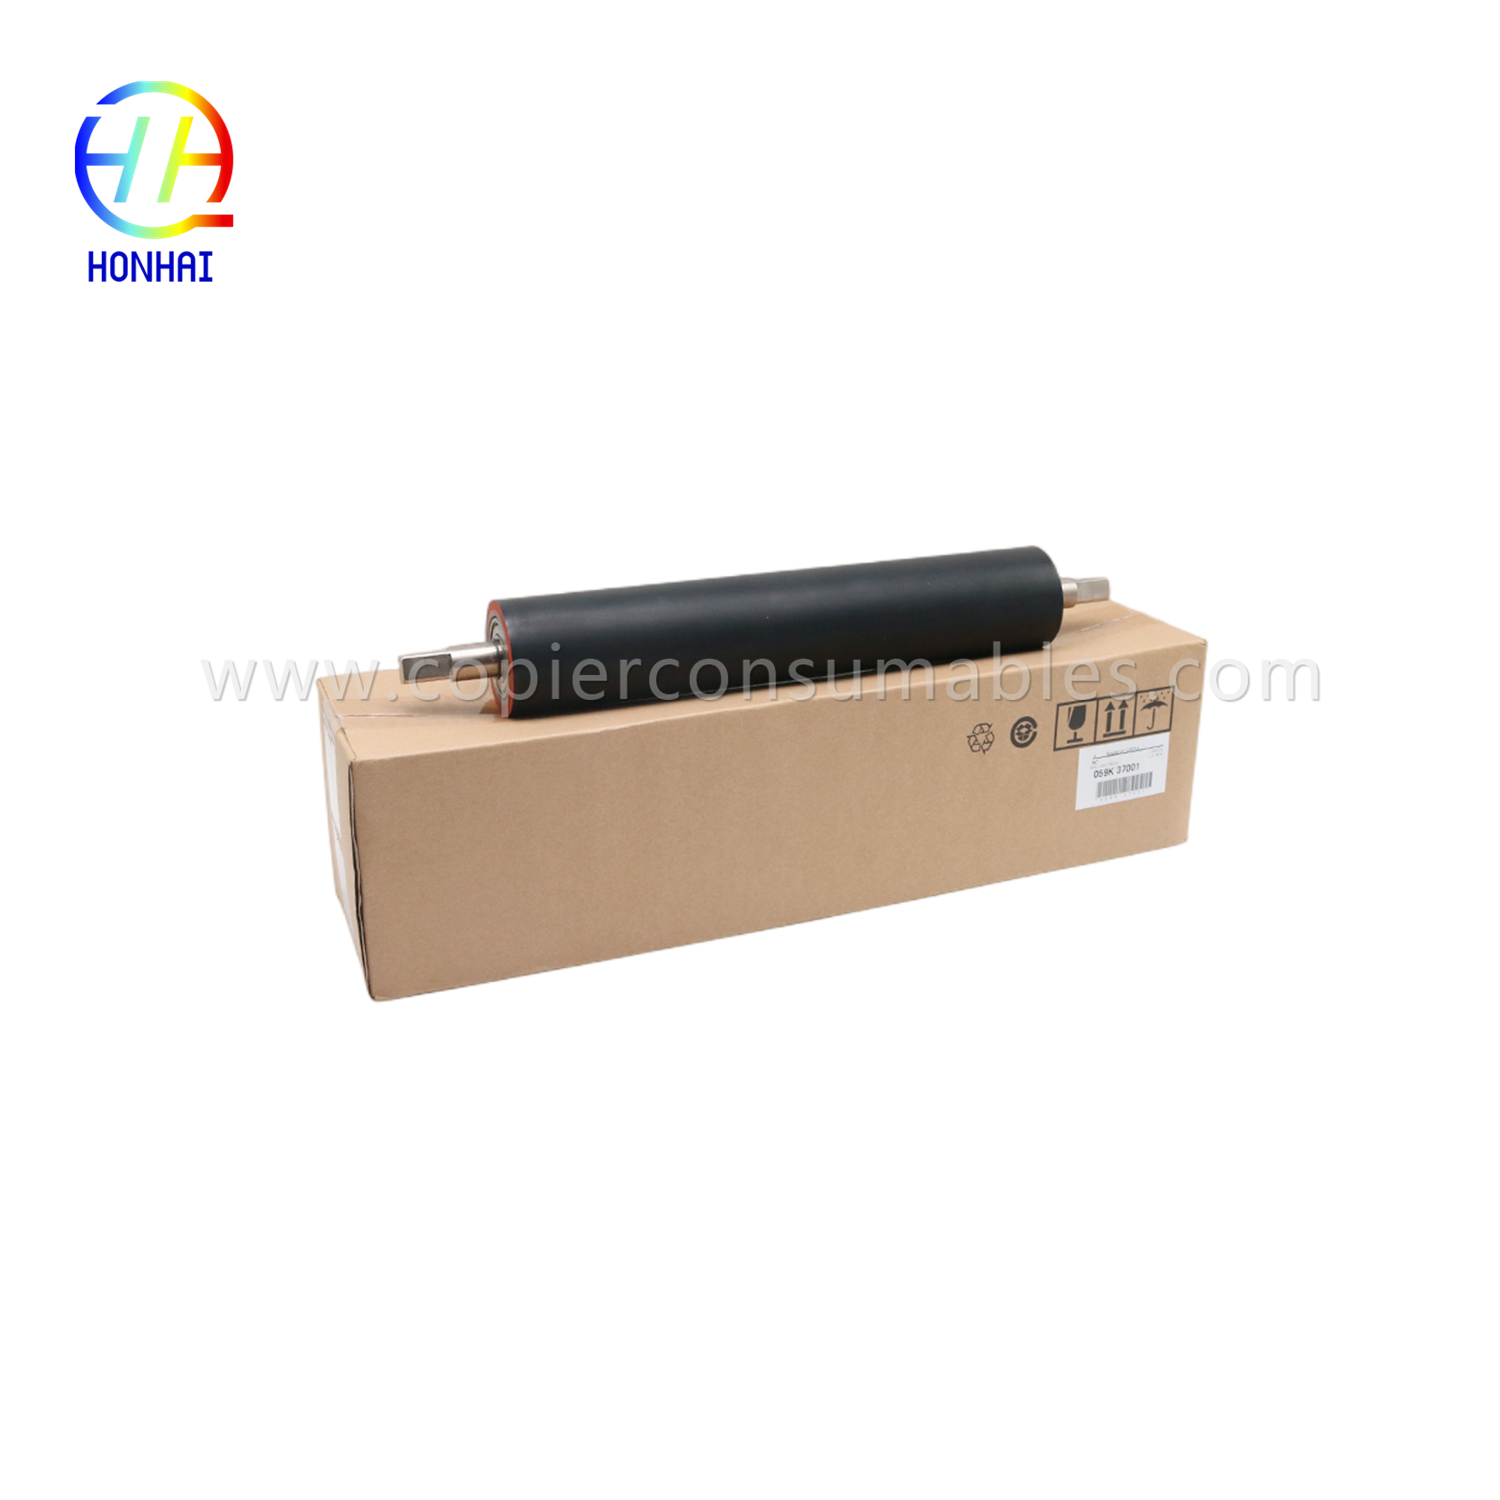 Lower Pressure Roller for Xerox DocuCentre 4110 900 1100 4127 4112 4595 059K37001